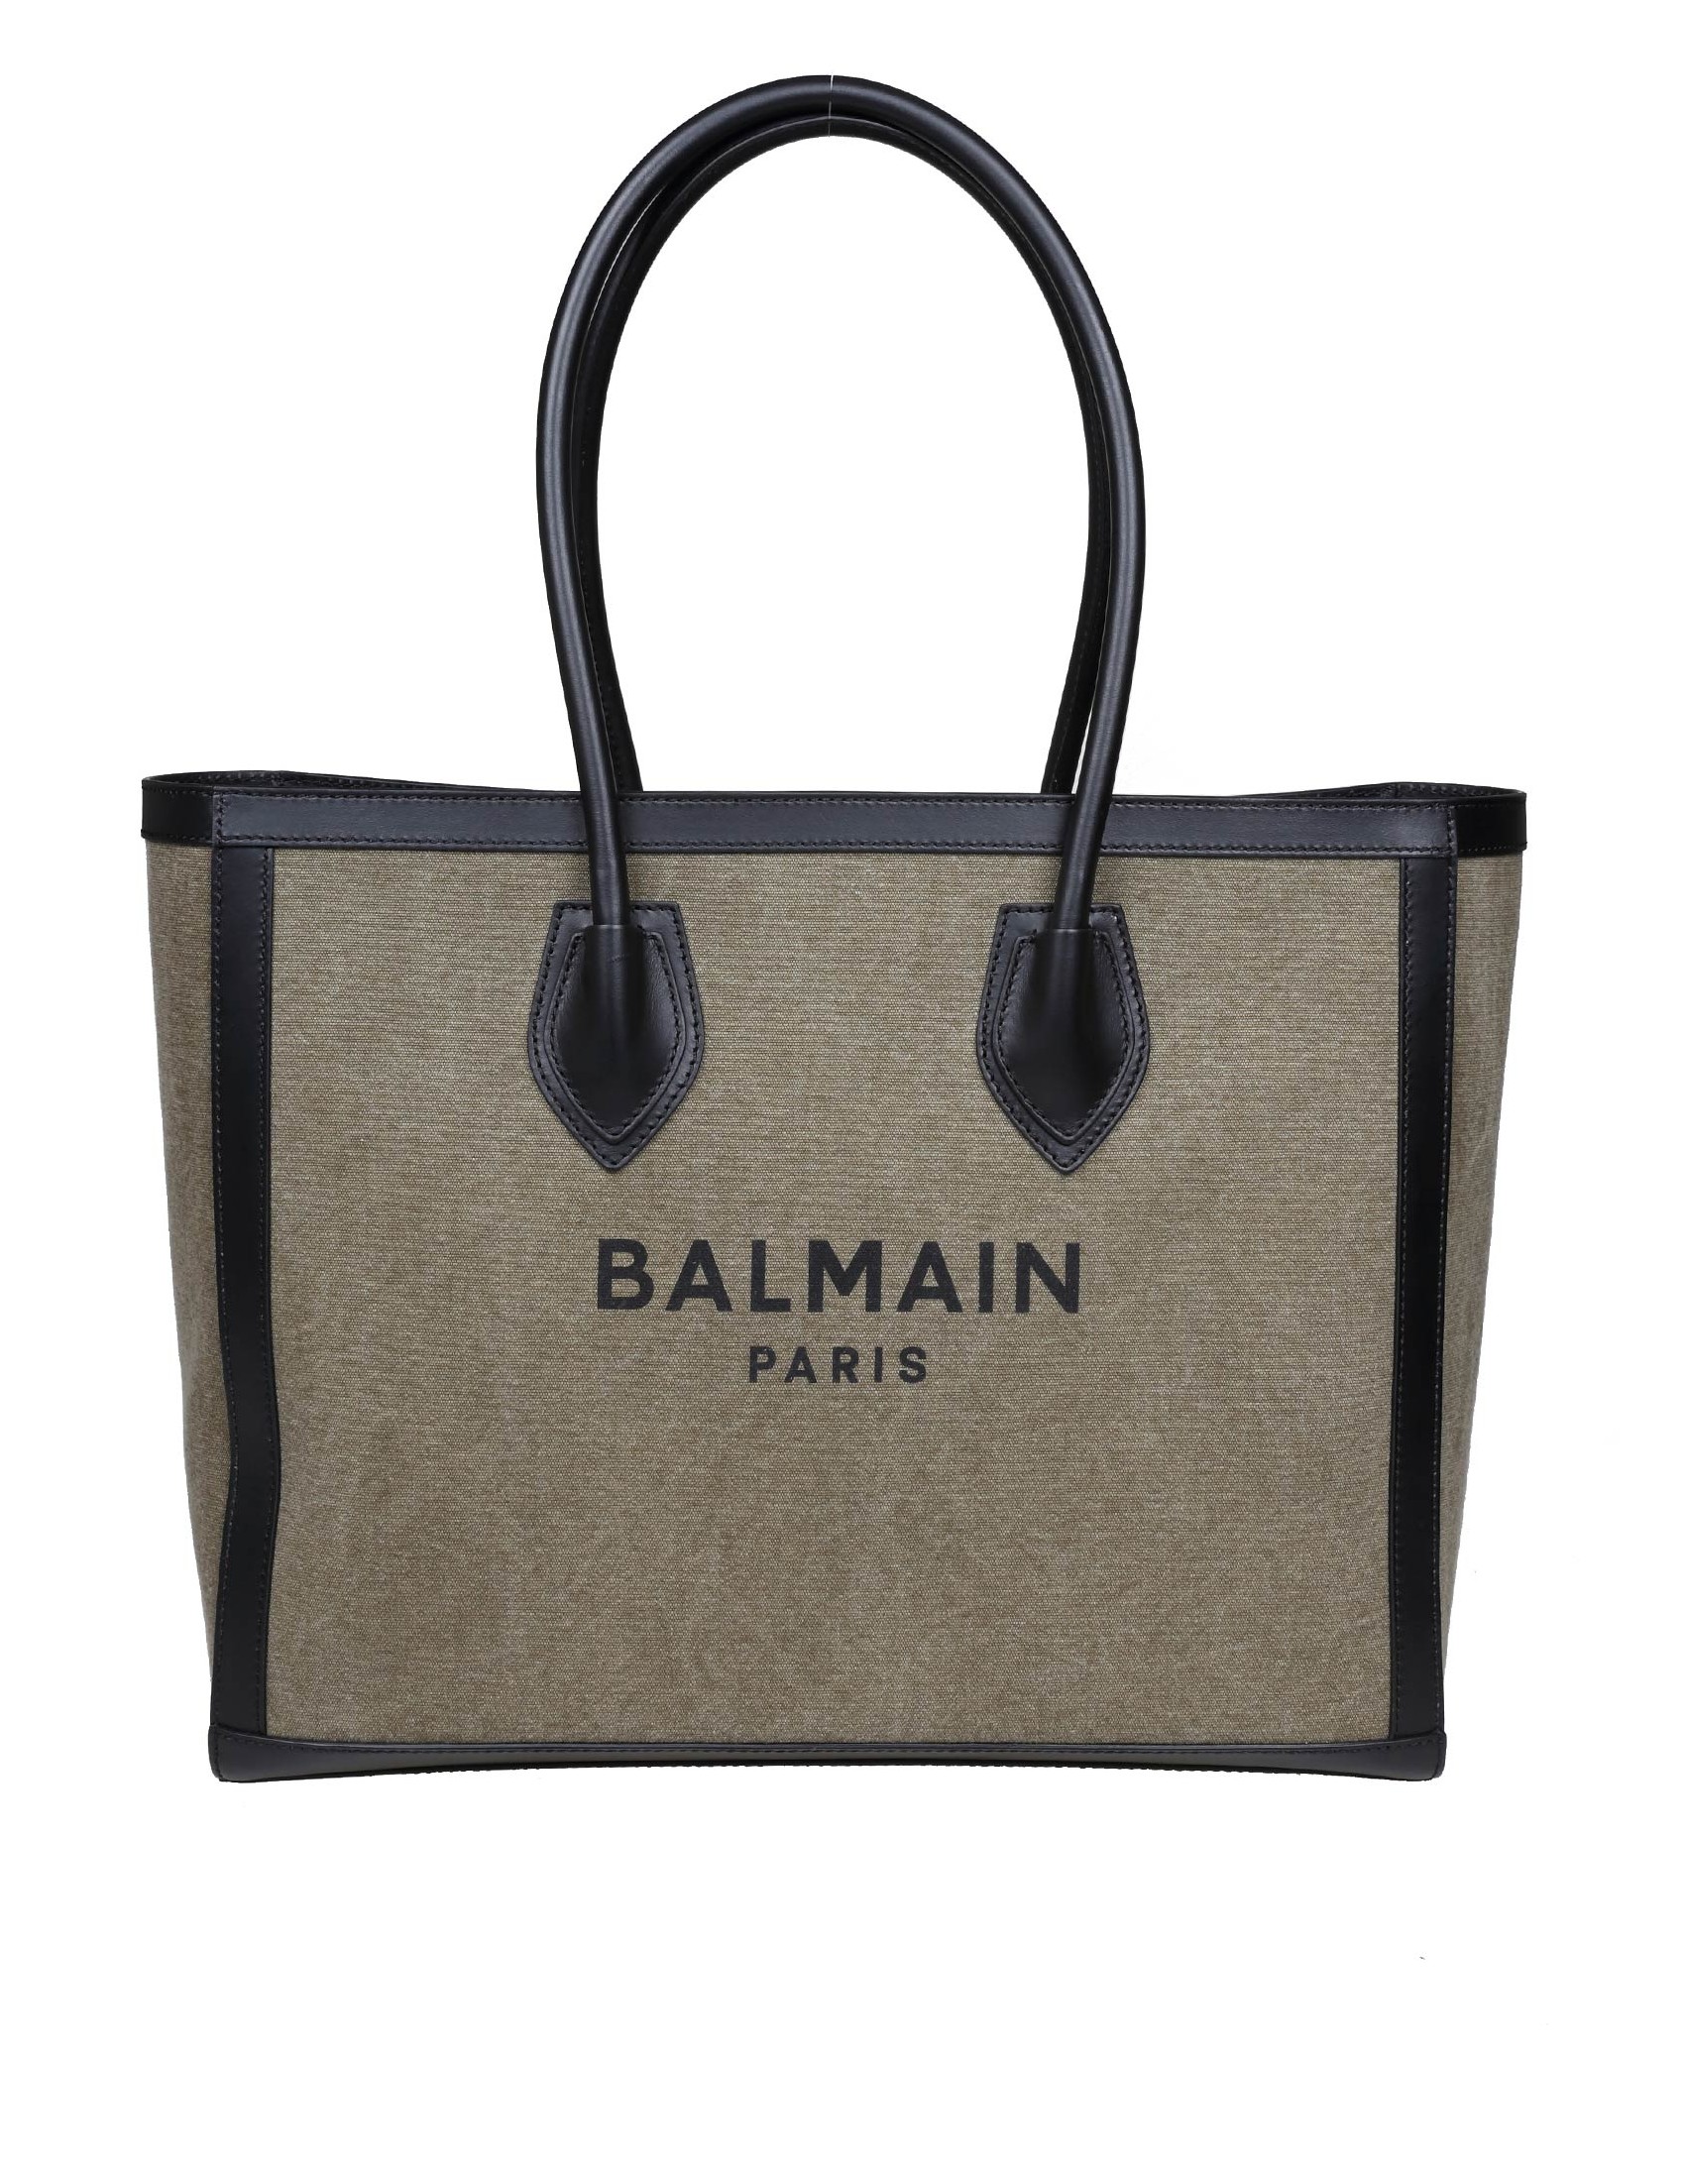 BALMAIN TOTE BAG B-ARMY 42 IN CANVAS AND LEATHER